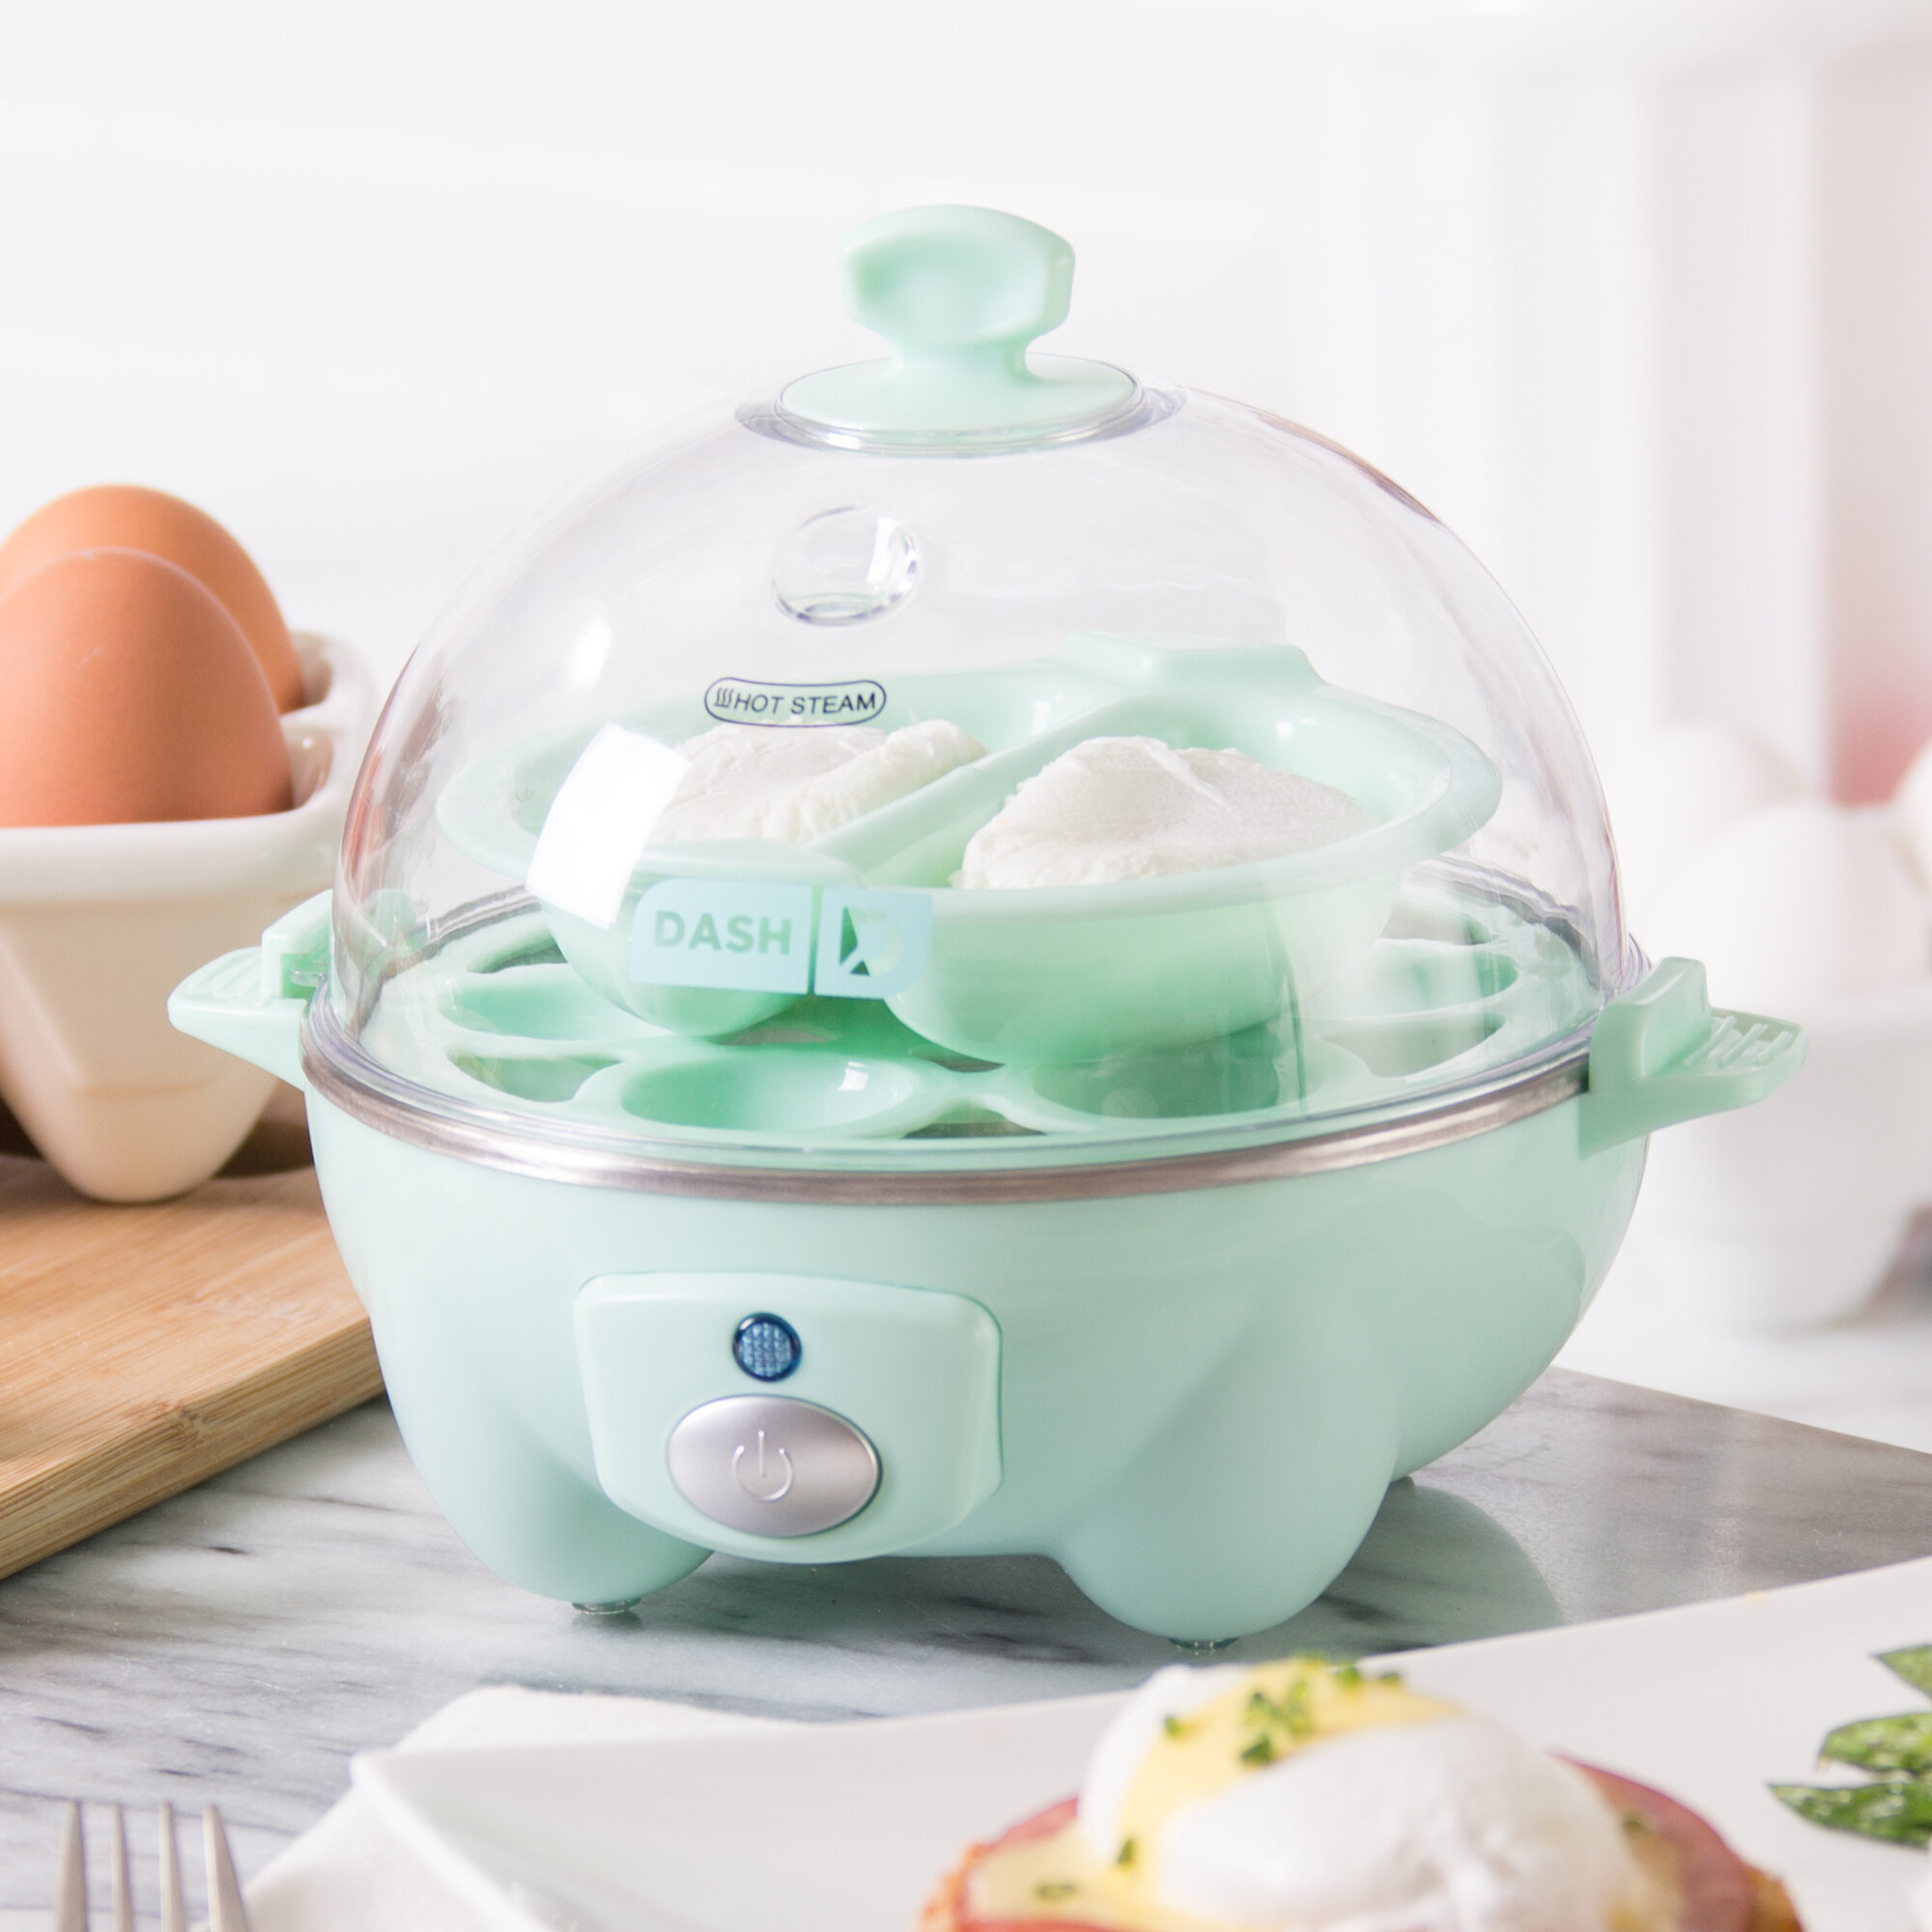 Rise by Dash Clean Slate Egg Cooker - Power Townsend Company